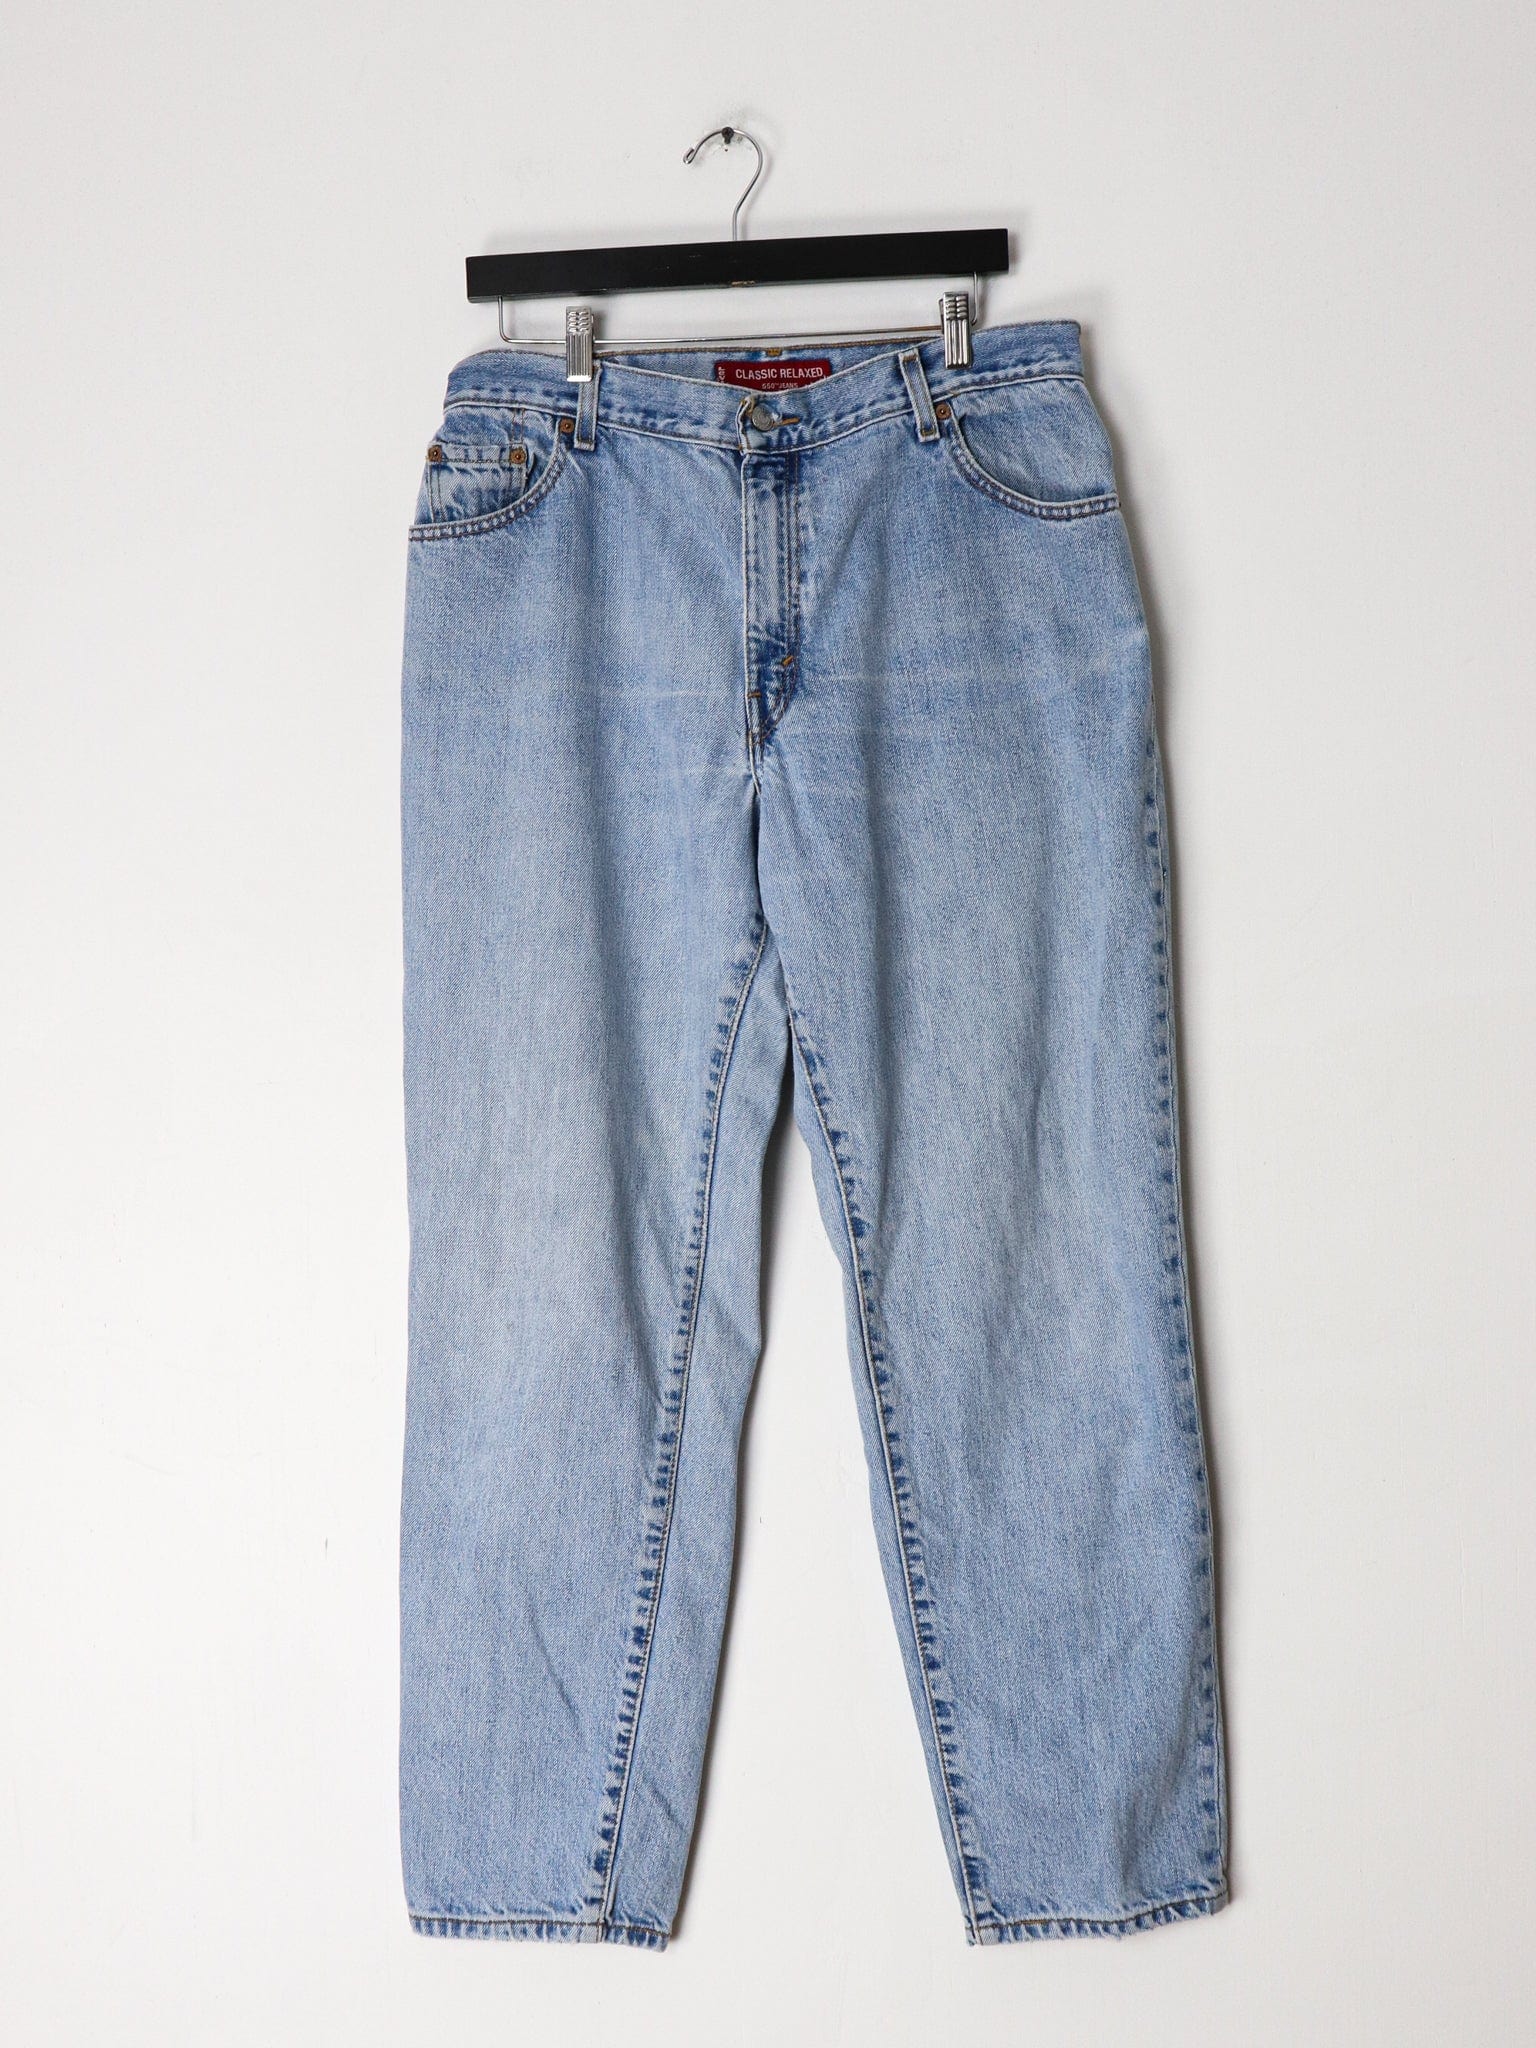 Levi's 550 Relaxed Tapered Leg Denim Jeans Women's Size 16